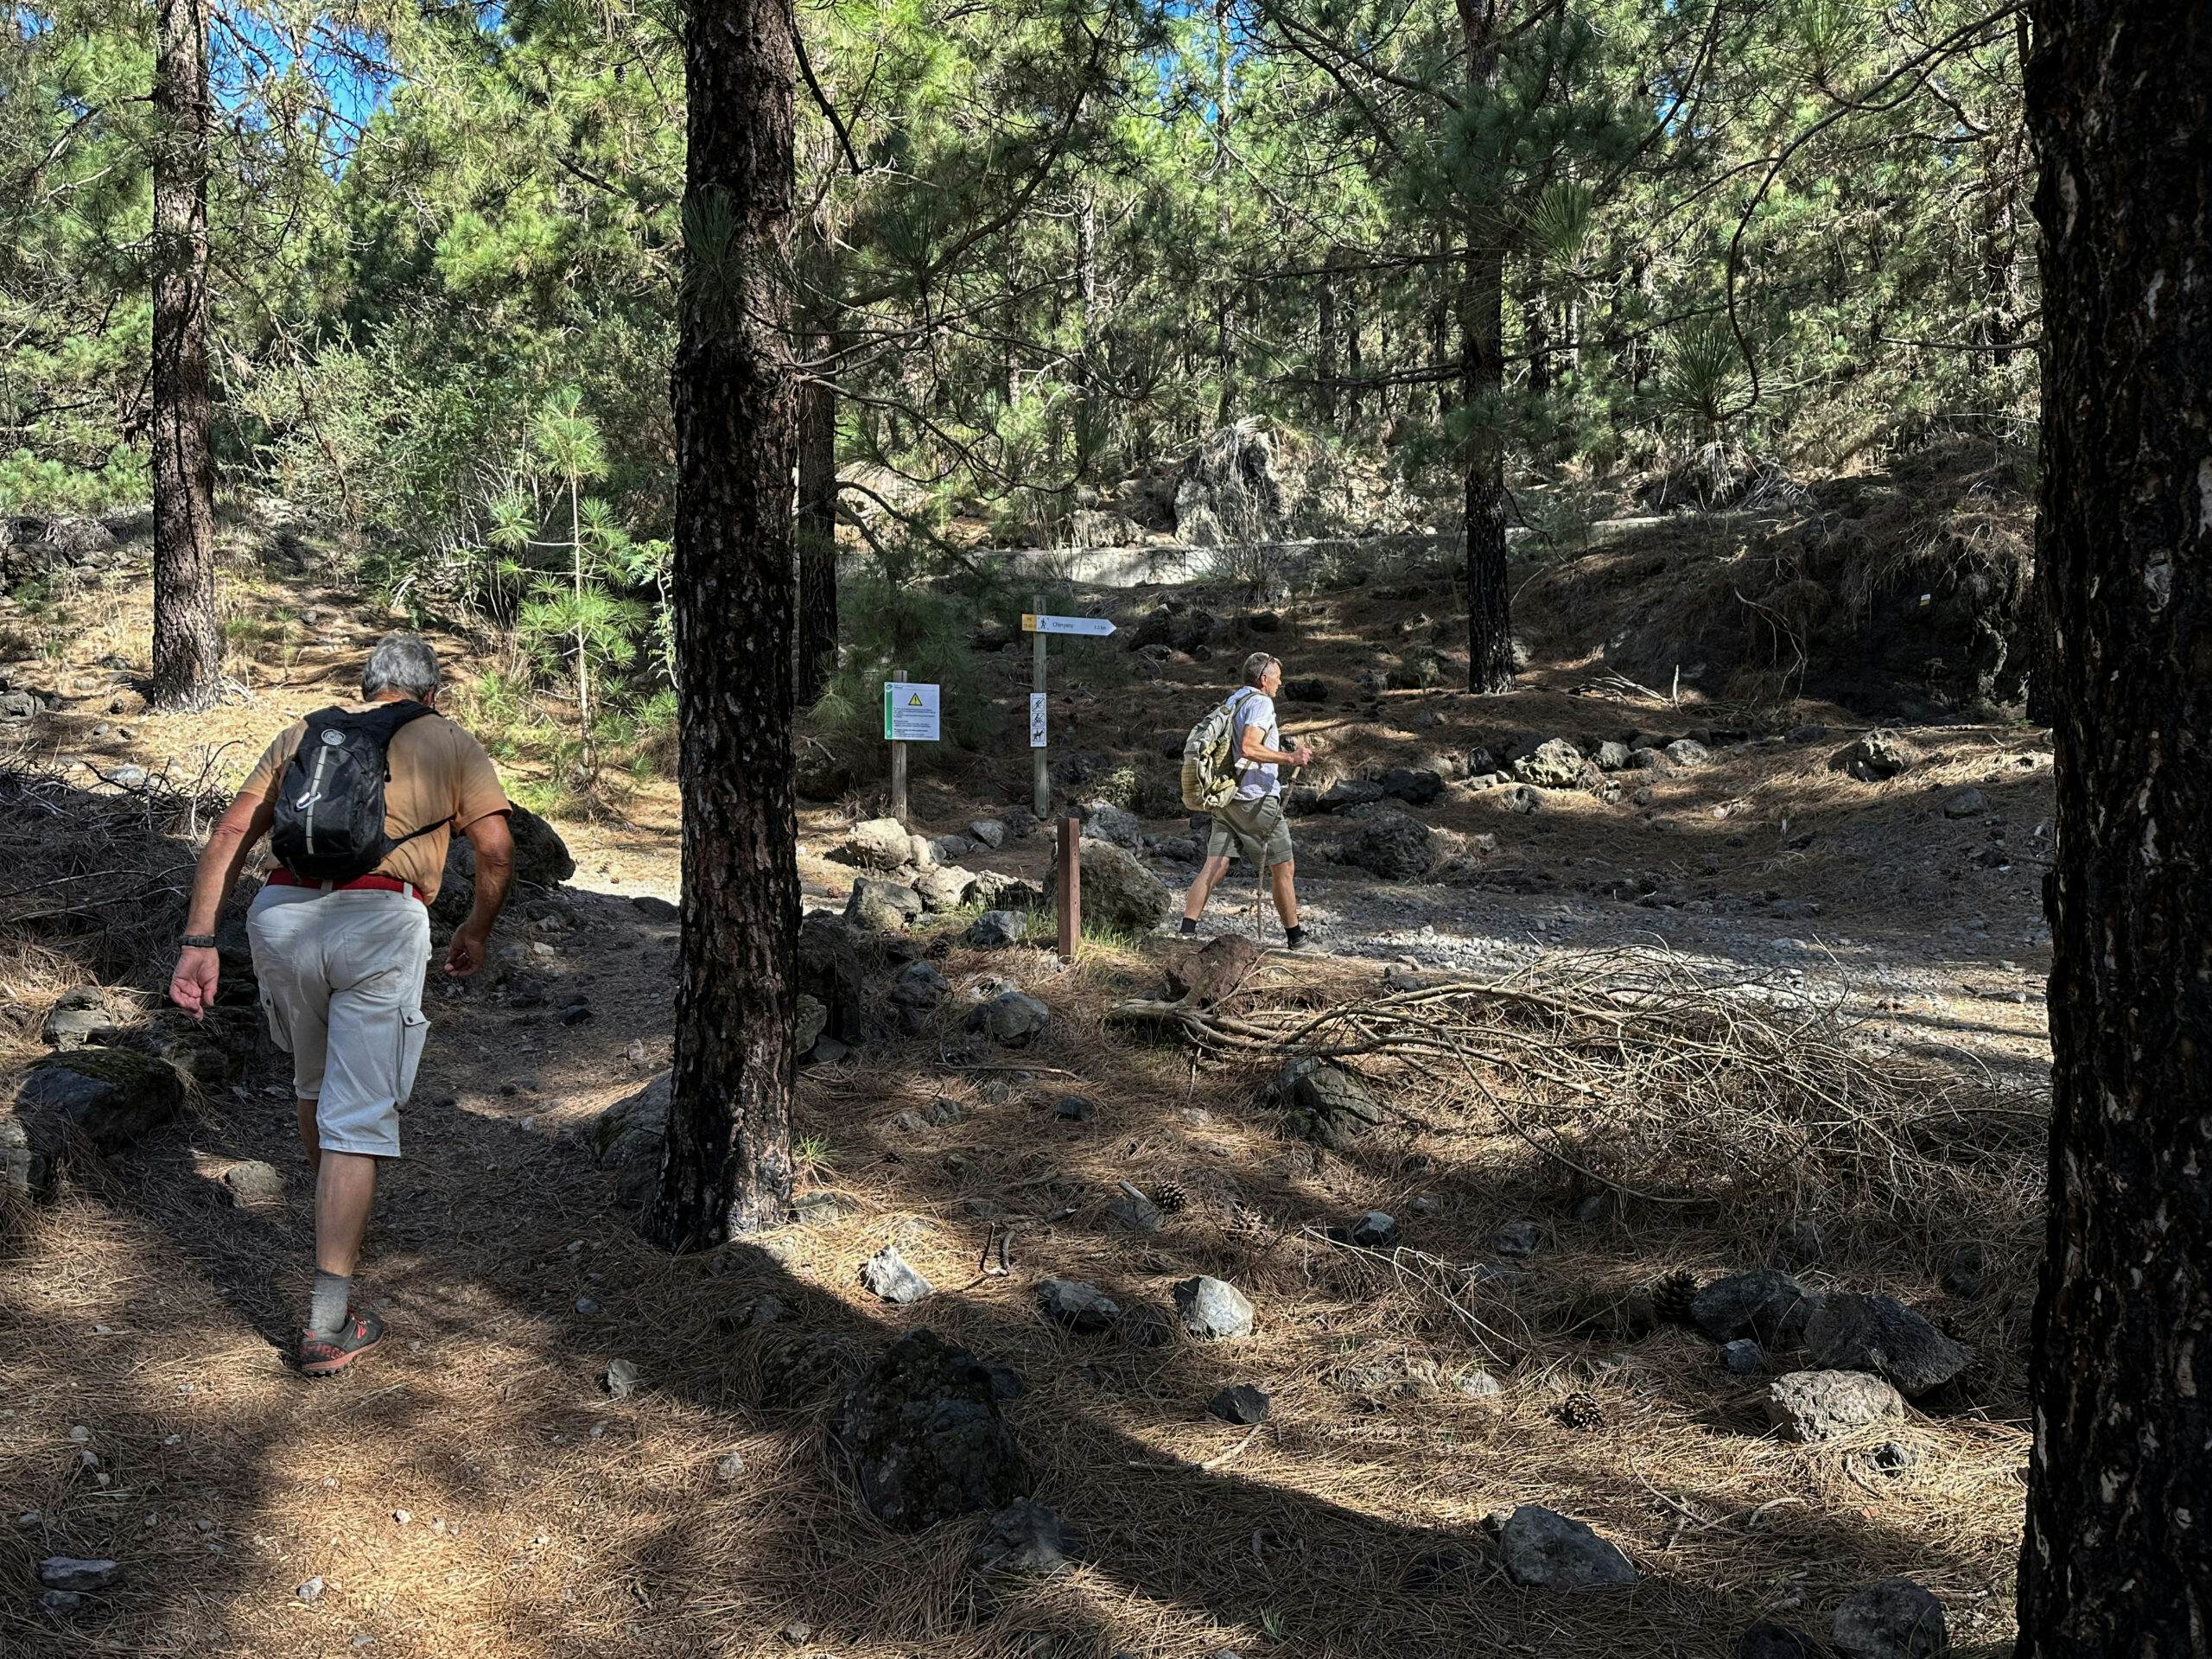 Hikers on the hiking trail in the forest towards the Chinyero volcano